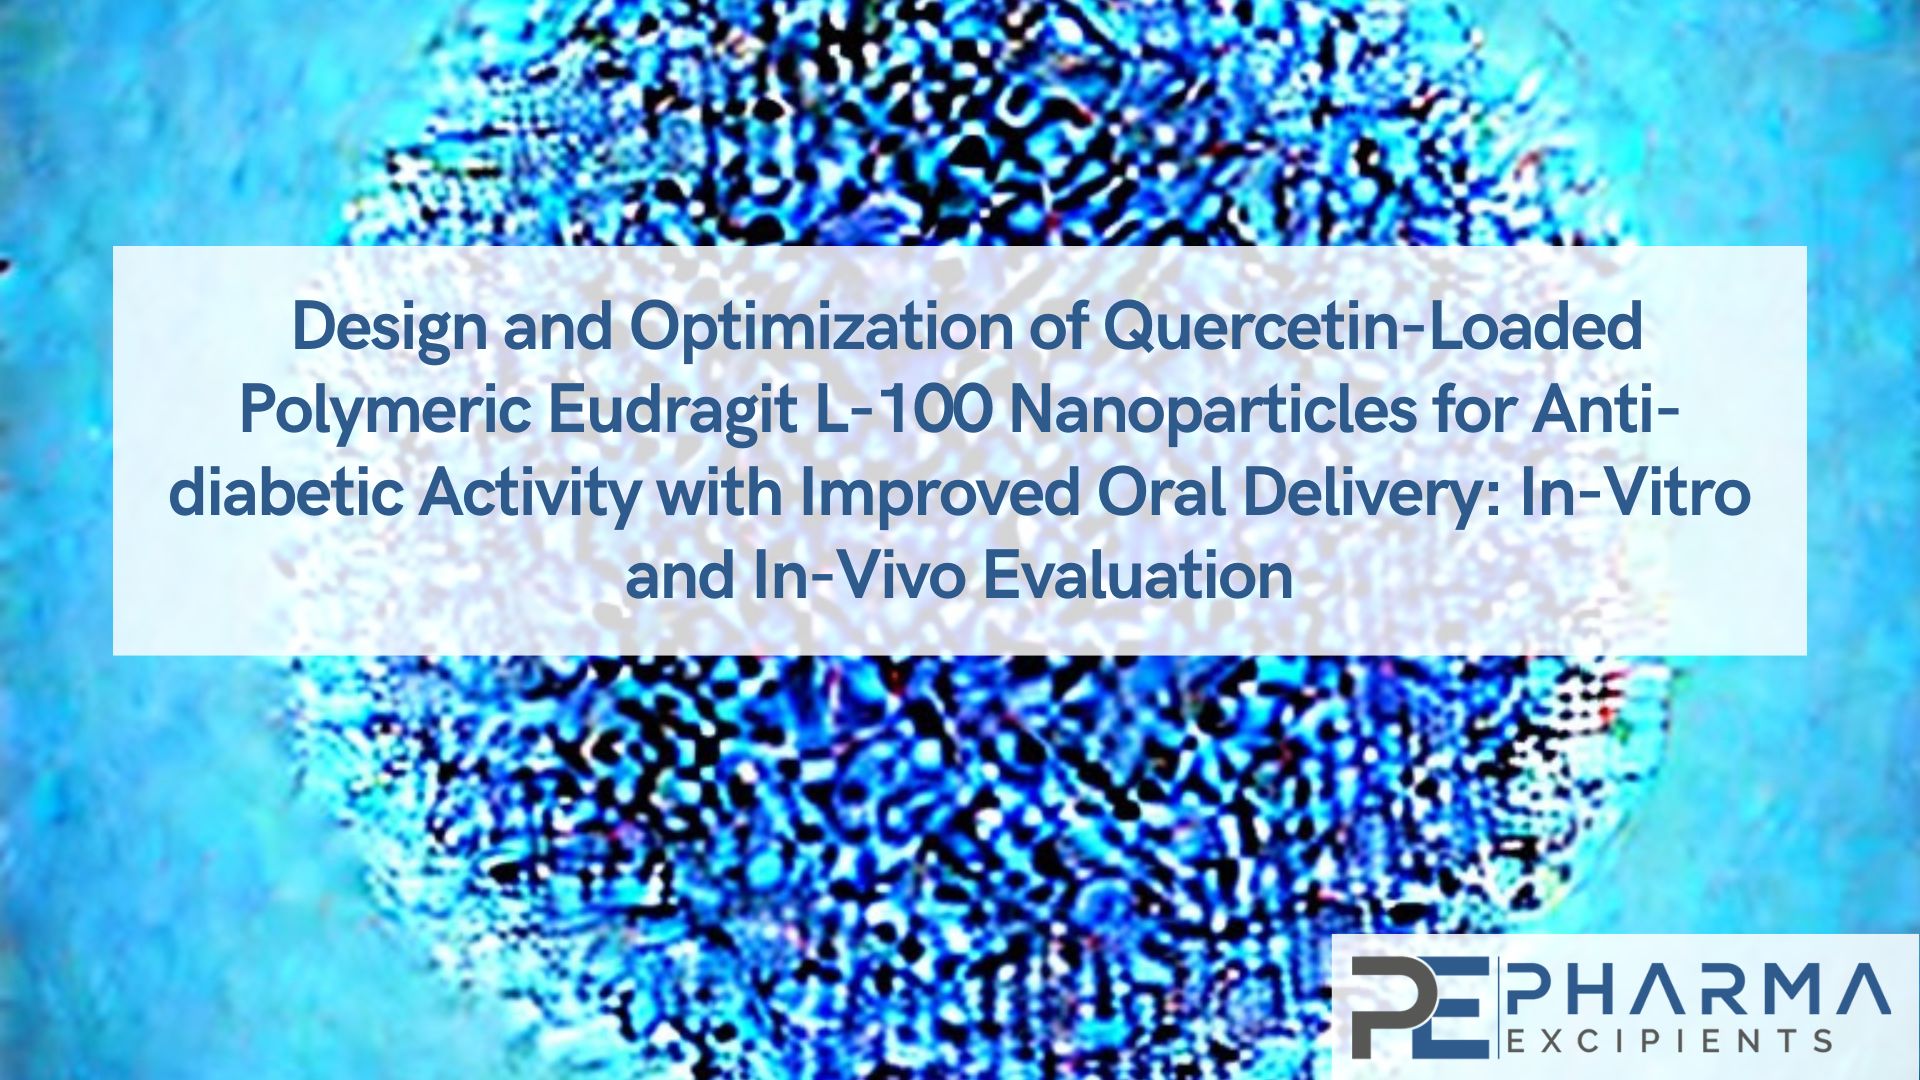 Design and Optimization of Quercetin-Loaded Polymeric Eudragit L-100 Nanoparticles for Anti-diabetic Activity with Improved Oral Delivery: In-Vitro and In-Vivo Evaluation